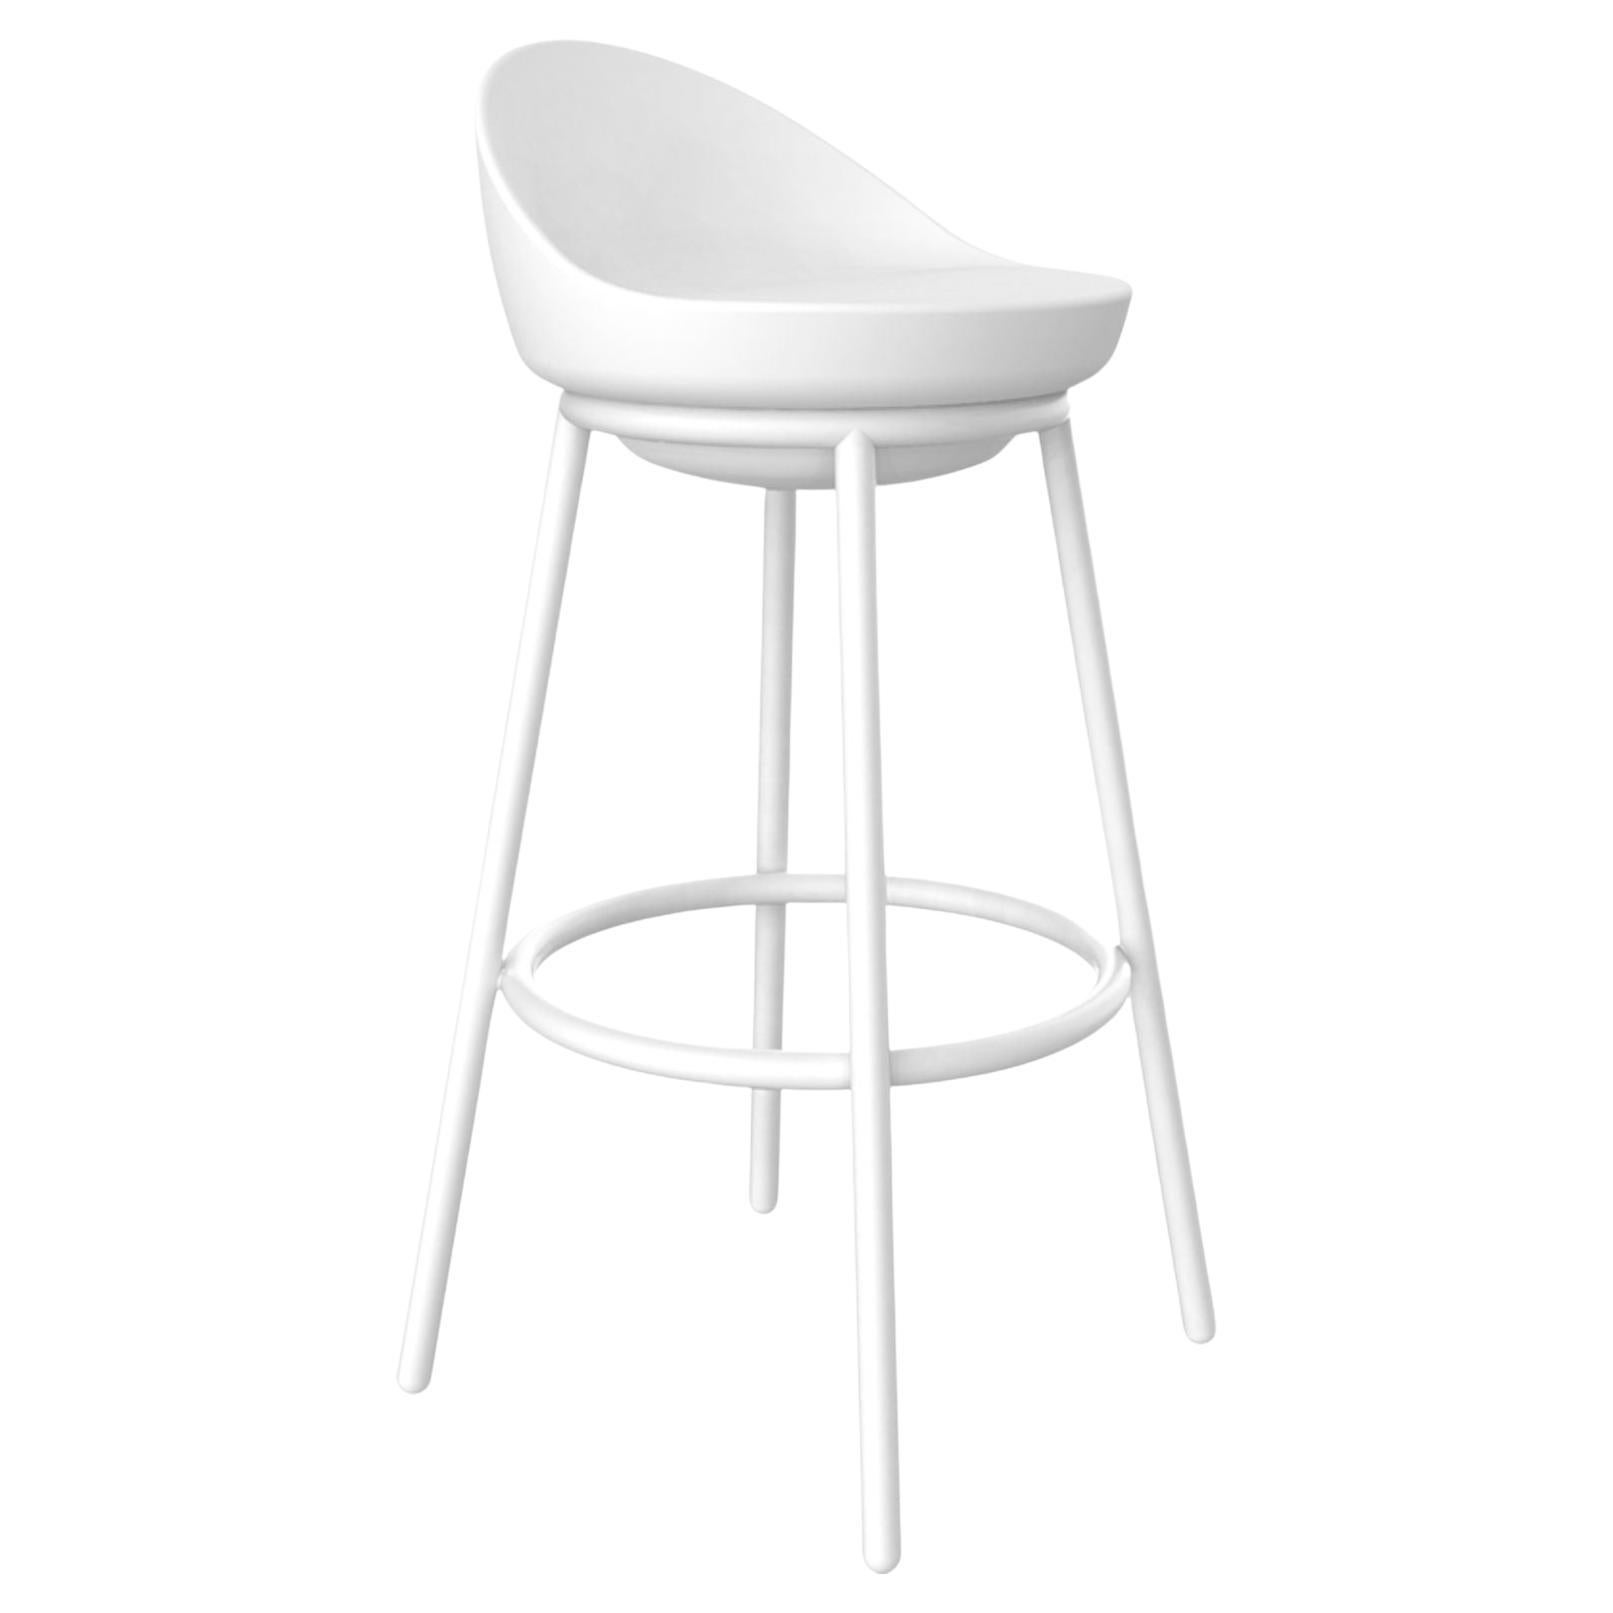 Lace White Stool by Mowee For Sale